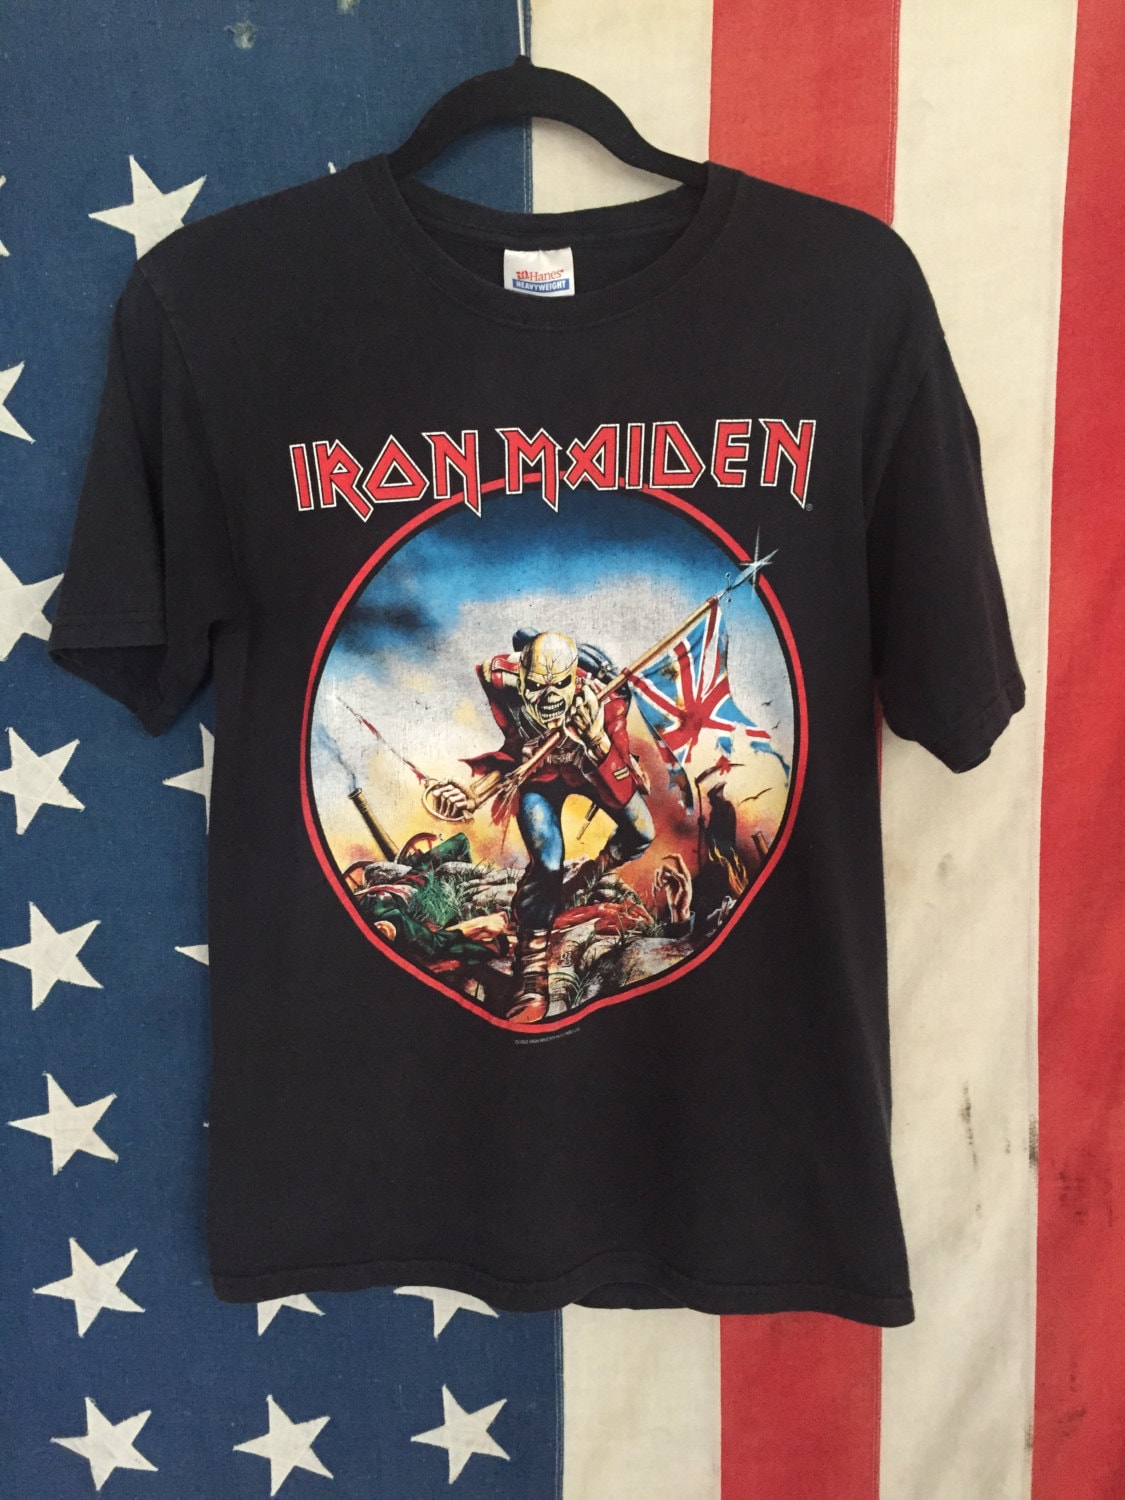 Iron Maiden shirt 80s heavy metal band tshirt by CottonFever